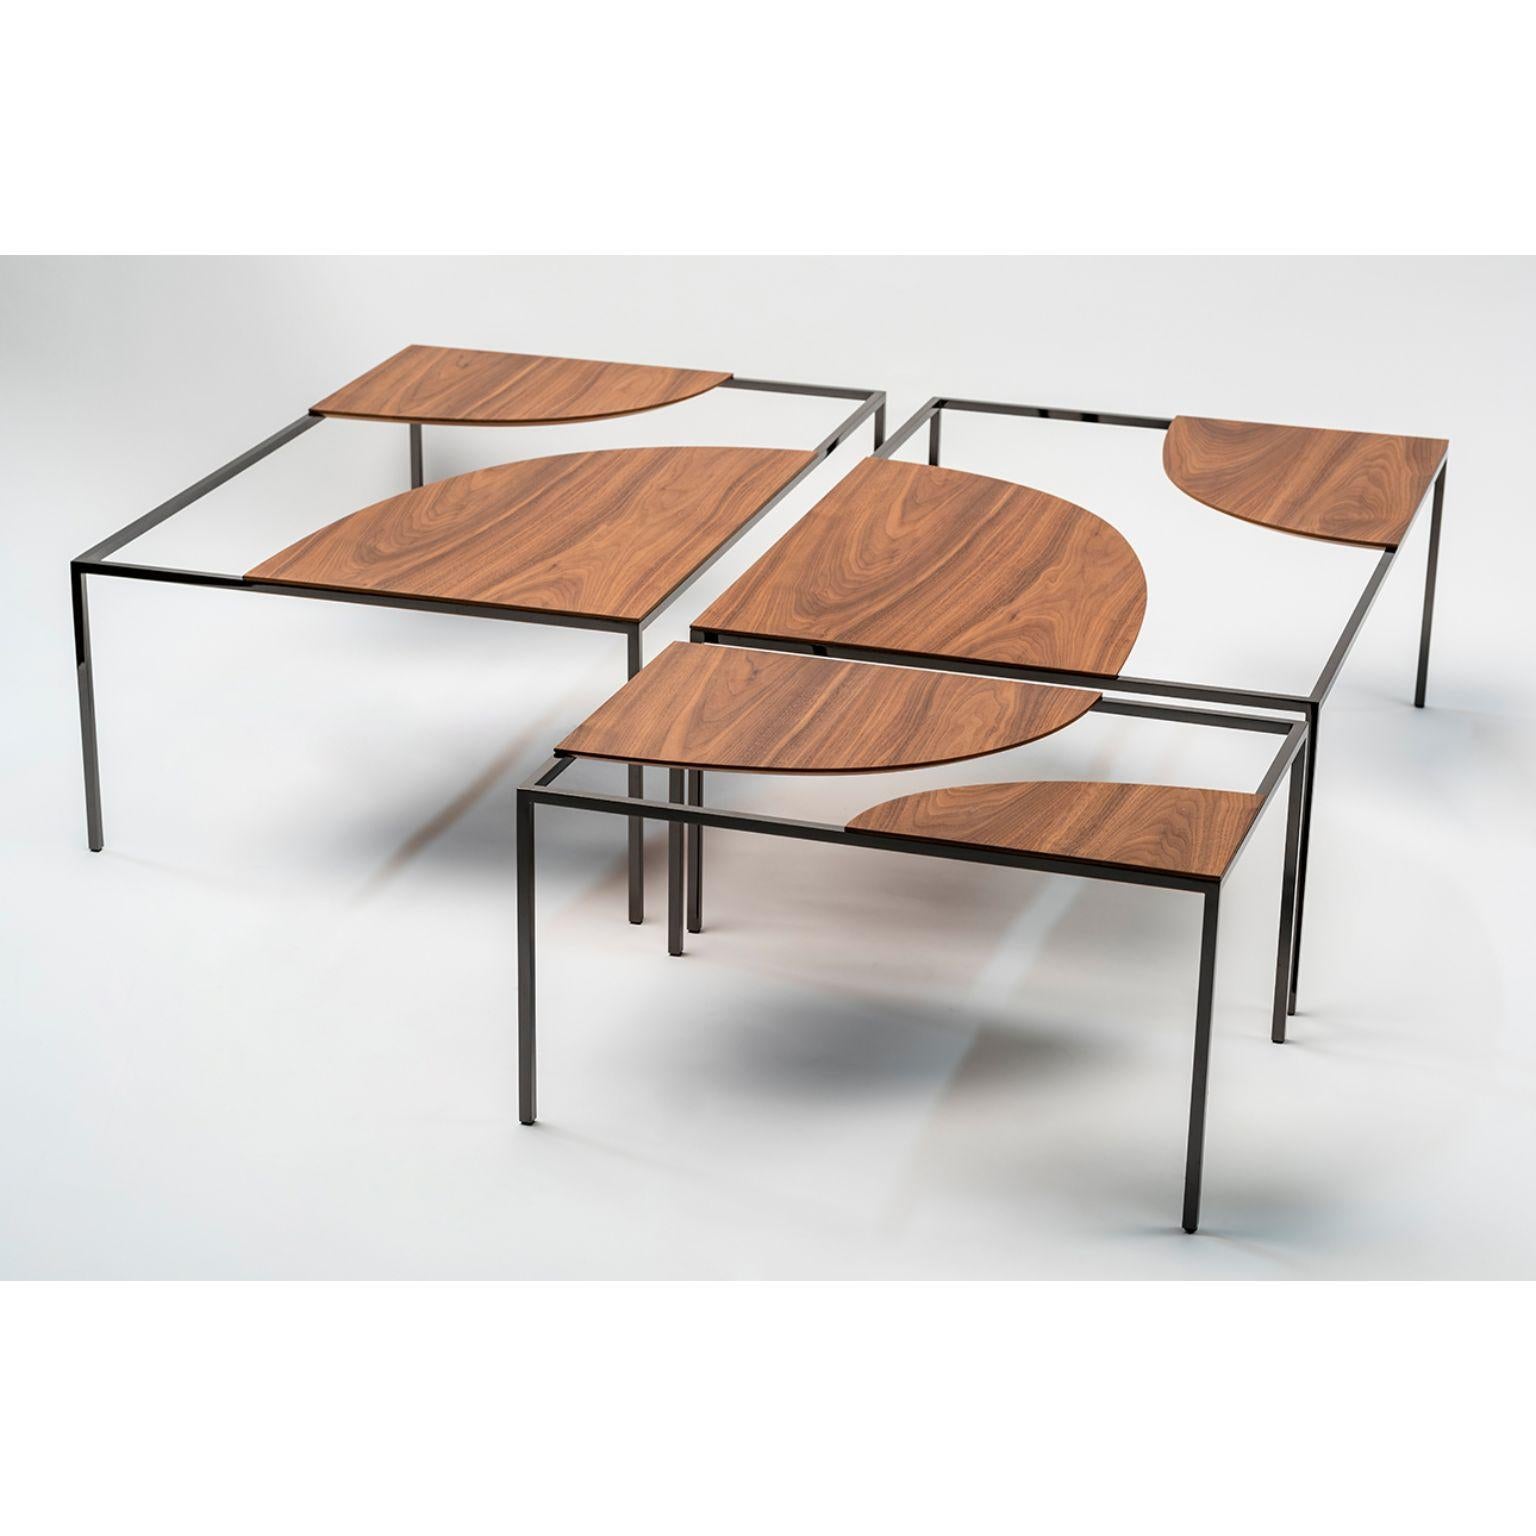 Set of 3 creek coffee table by Nendo
Materials: top: solid wood (Also available in powder coated metal)
Structure: Black chrome metal
Dimensions: W 90 x D 60 x H 31.7 cm
W 60 x D 40 x H 31.7 cm

Creek is a table that suggests a stream of water